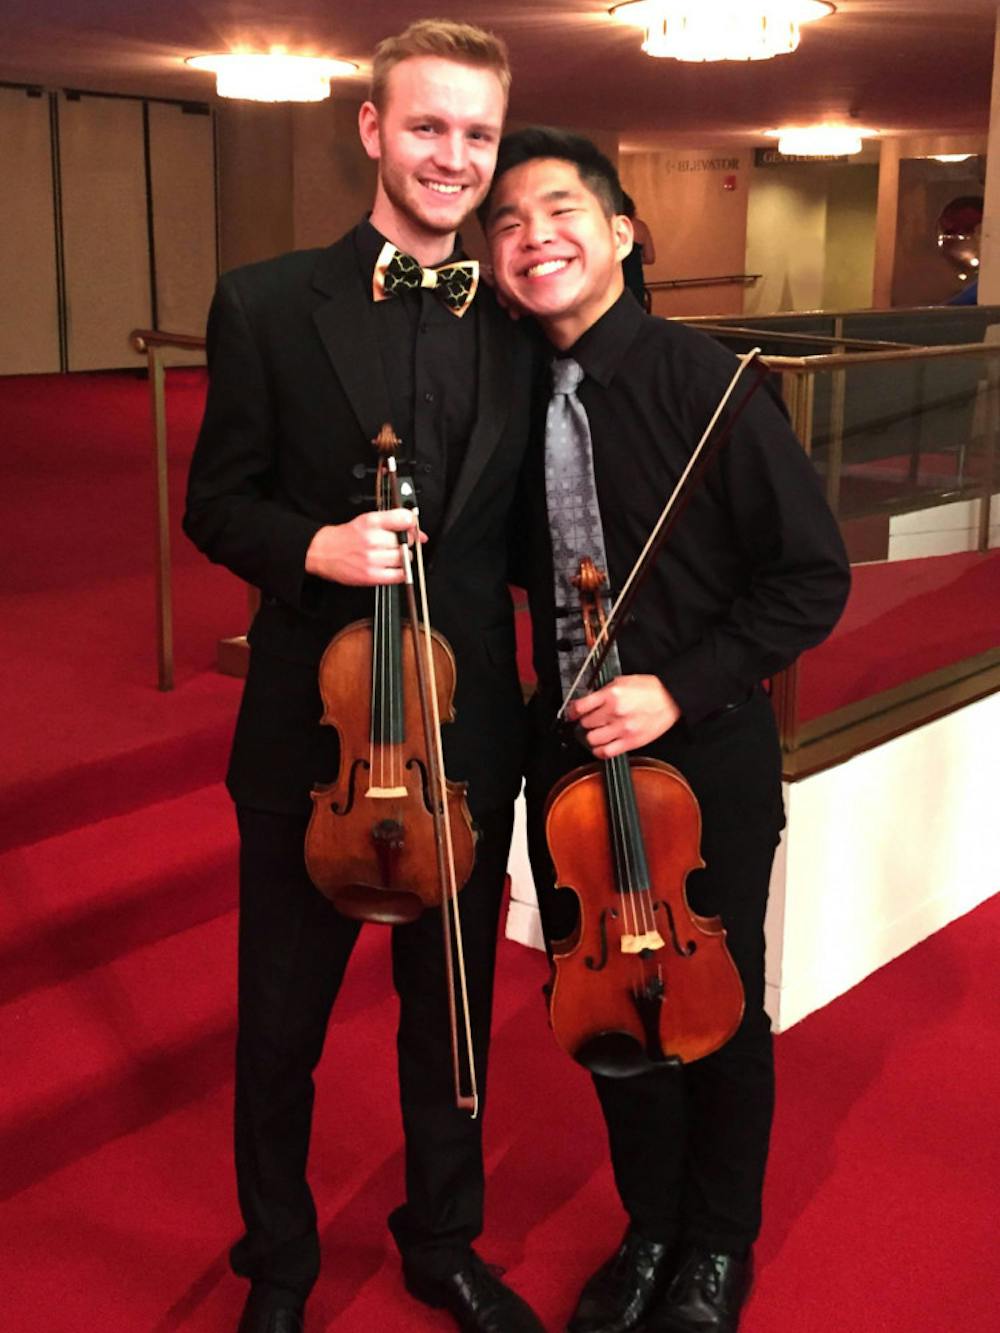 Michael Chong, right, and fellow Robert McDuffie Center student Keoni Bolding before a chamber performance at the Kennedy Center in Washington, D.C.